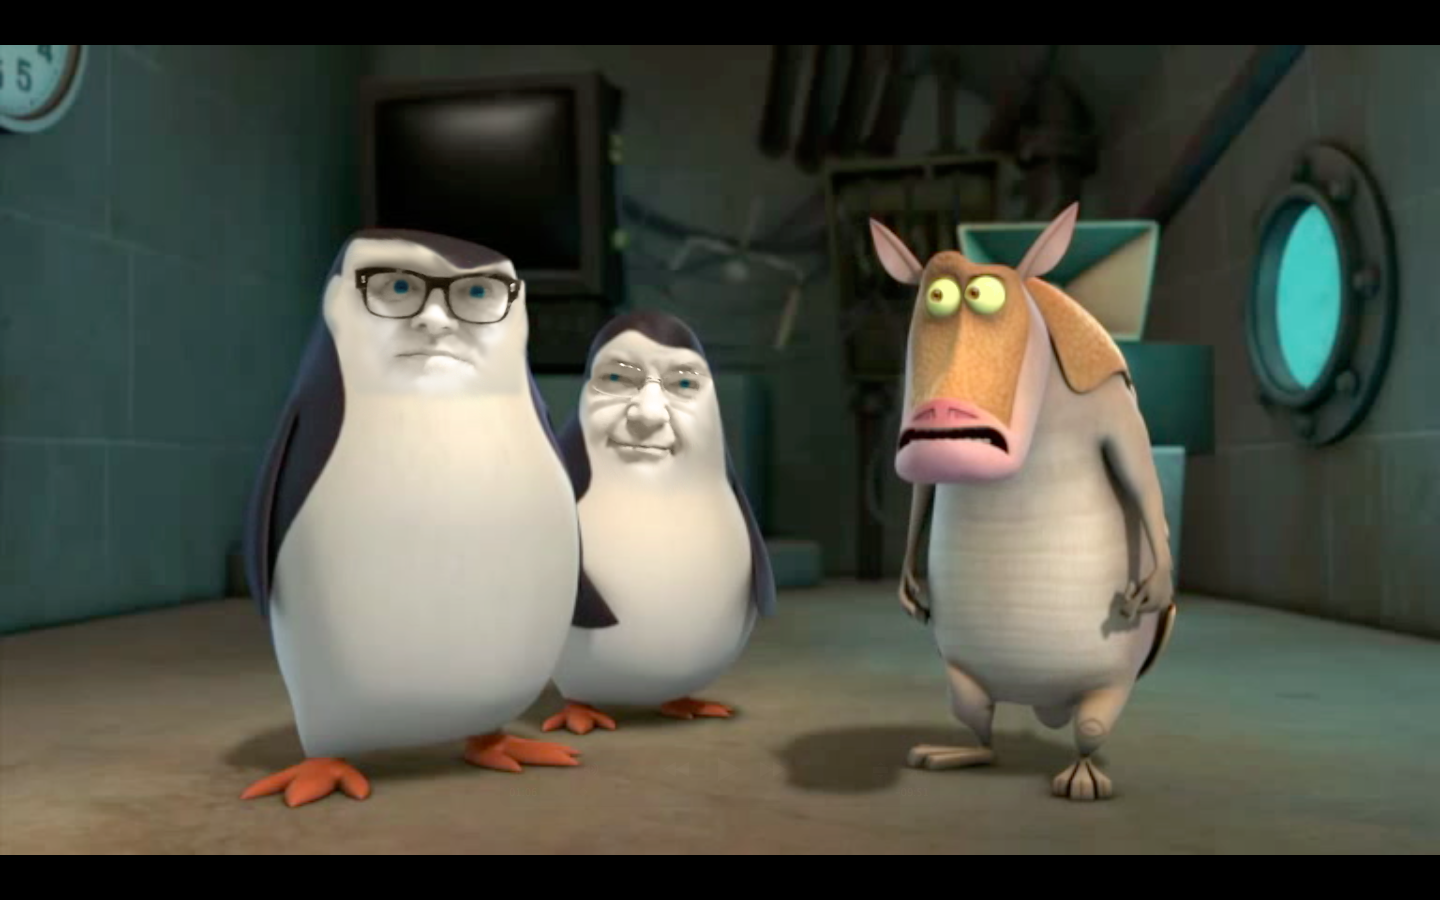 So I Made Another Face Swap Penguins Of Madagascar Photo